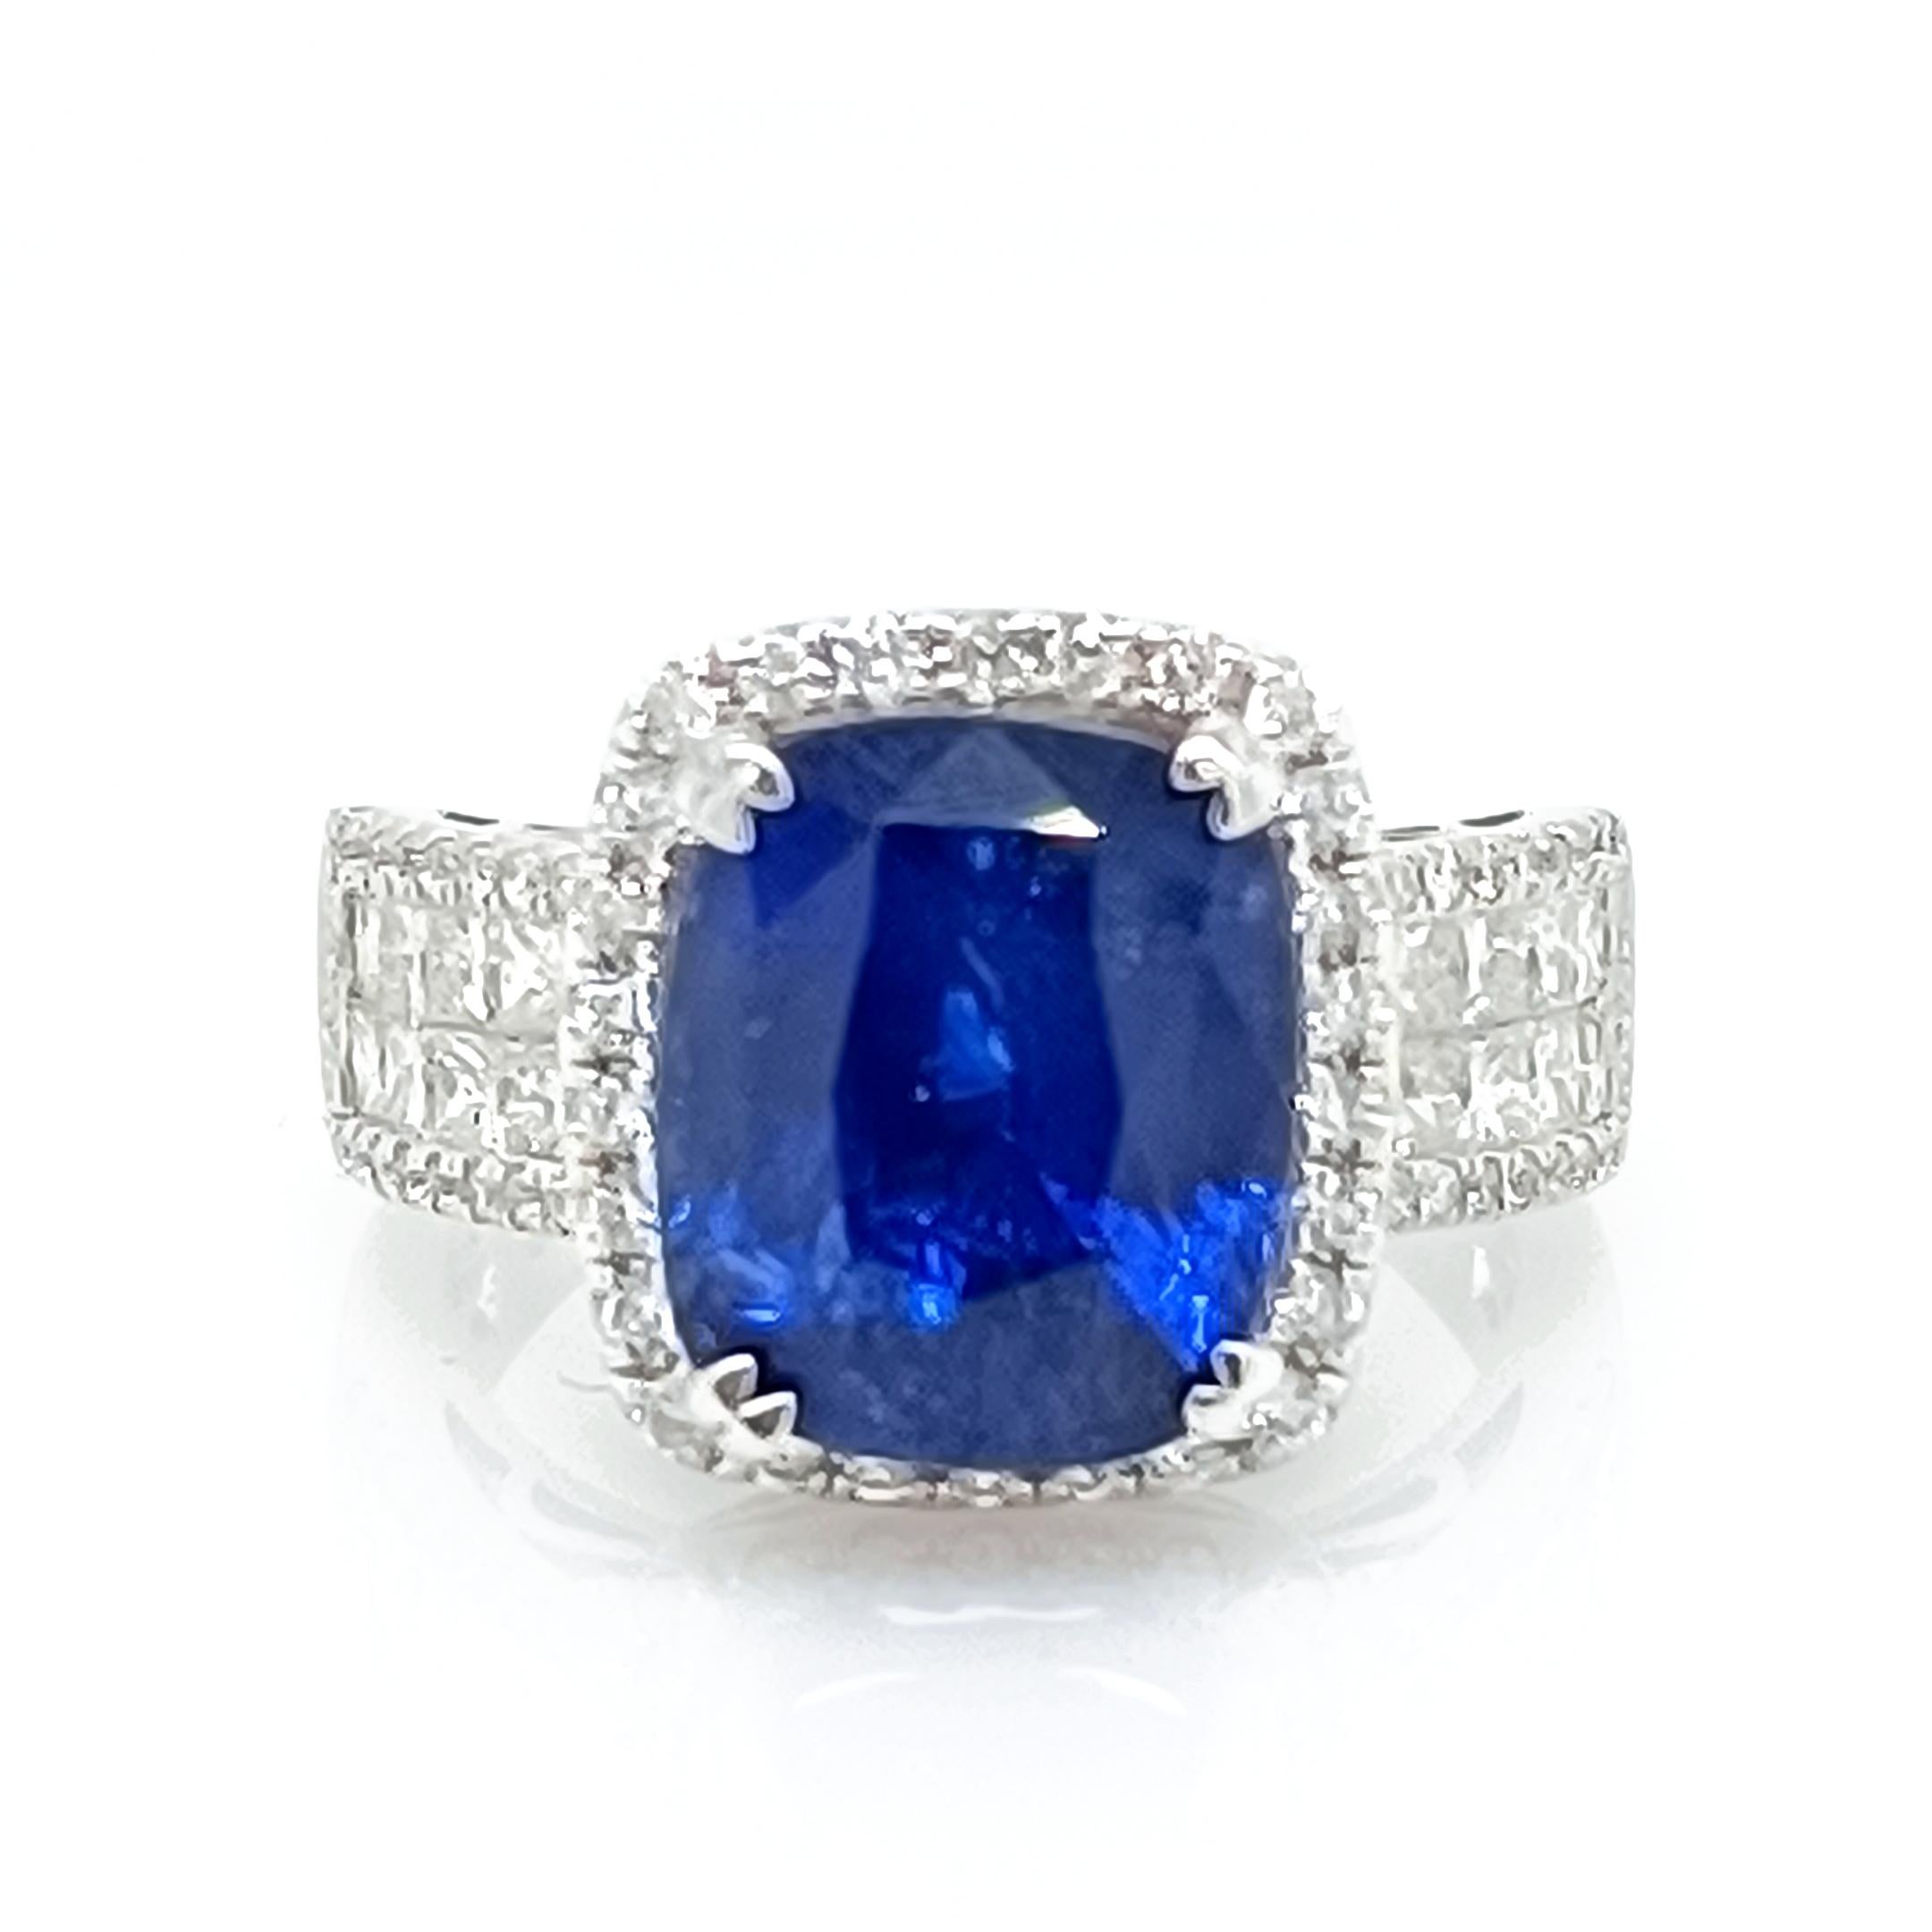 Blue Sapphire 8.26 Cts surrounded by diamond 1.33 Cts  

Set in 14K white gold,  5.99 Grams